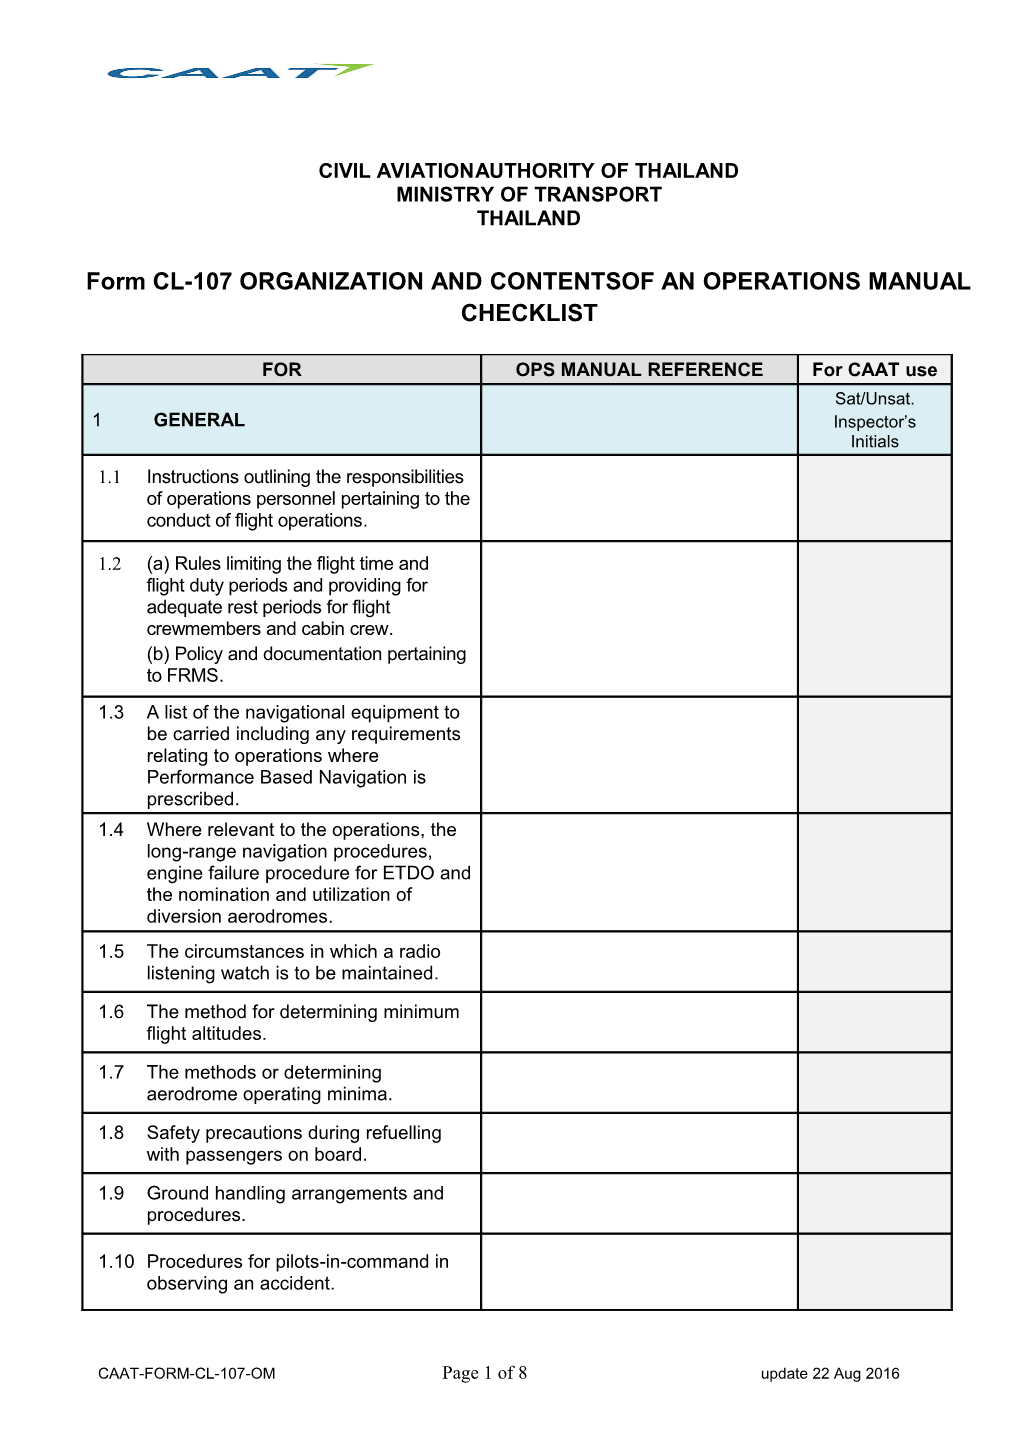 Form CL-107 ORGANIZATION and CONTENTSOF an OPERATIONS MANUAL CHECKLIST